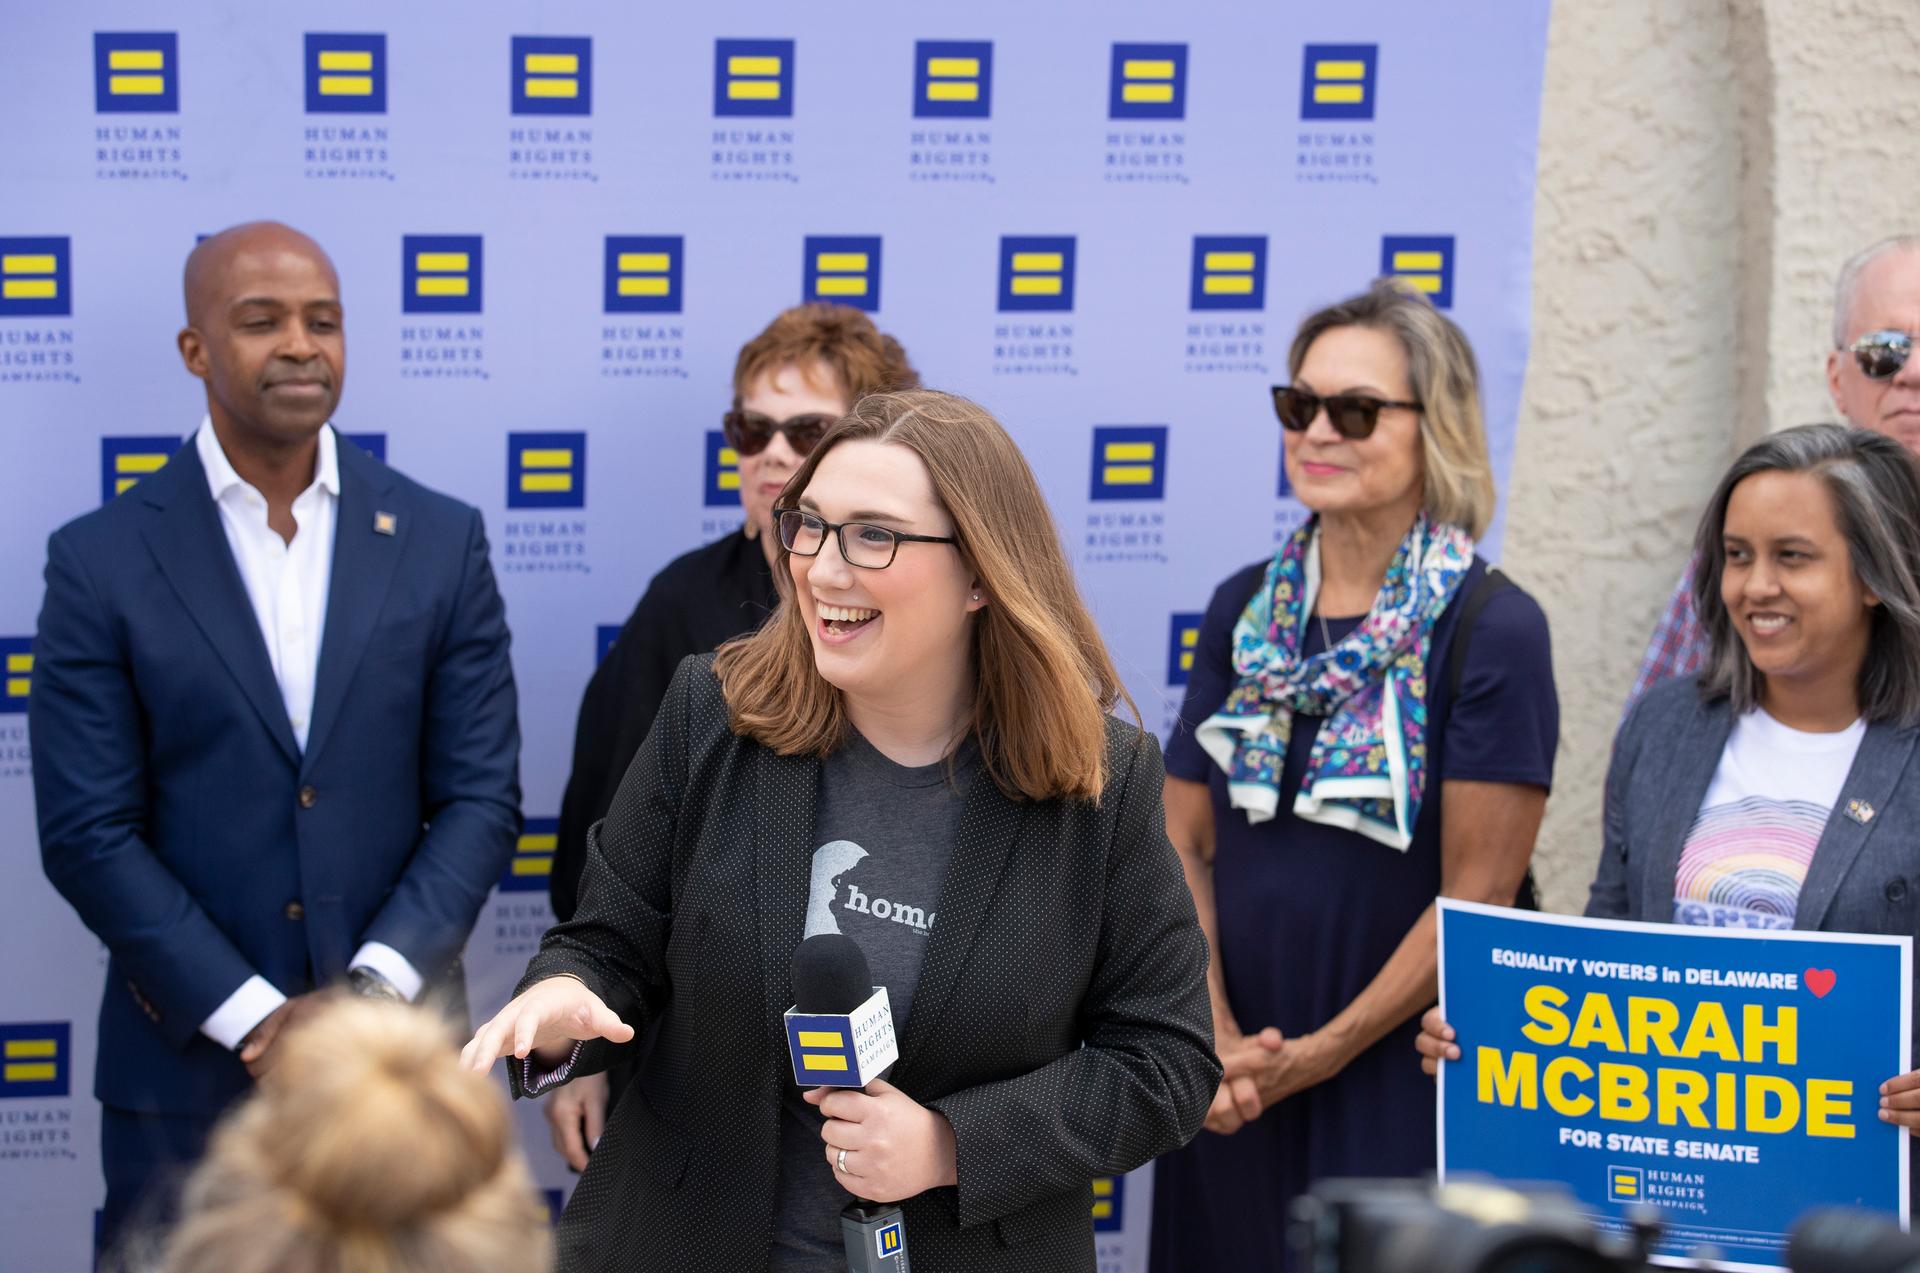 Sarah McBride, then a candidate for Delaware state senate, speaks during an event that announced her endorsement by the Human Rights Campaign in Wilmington, Delaware, Aug. 25, 2019.